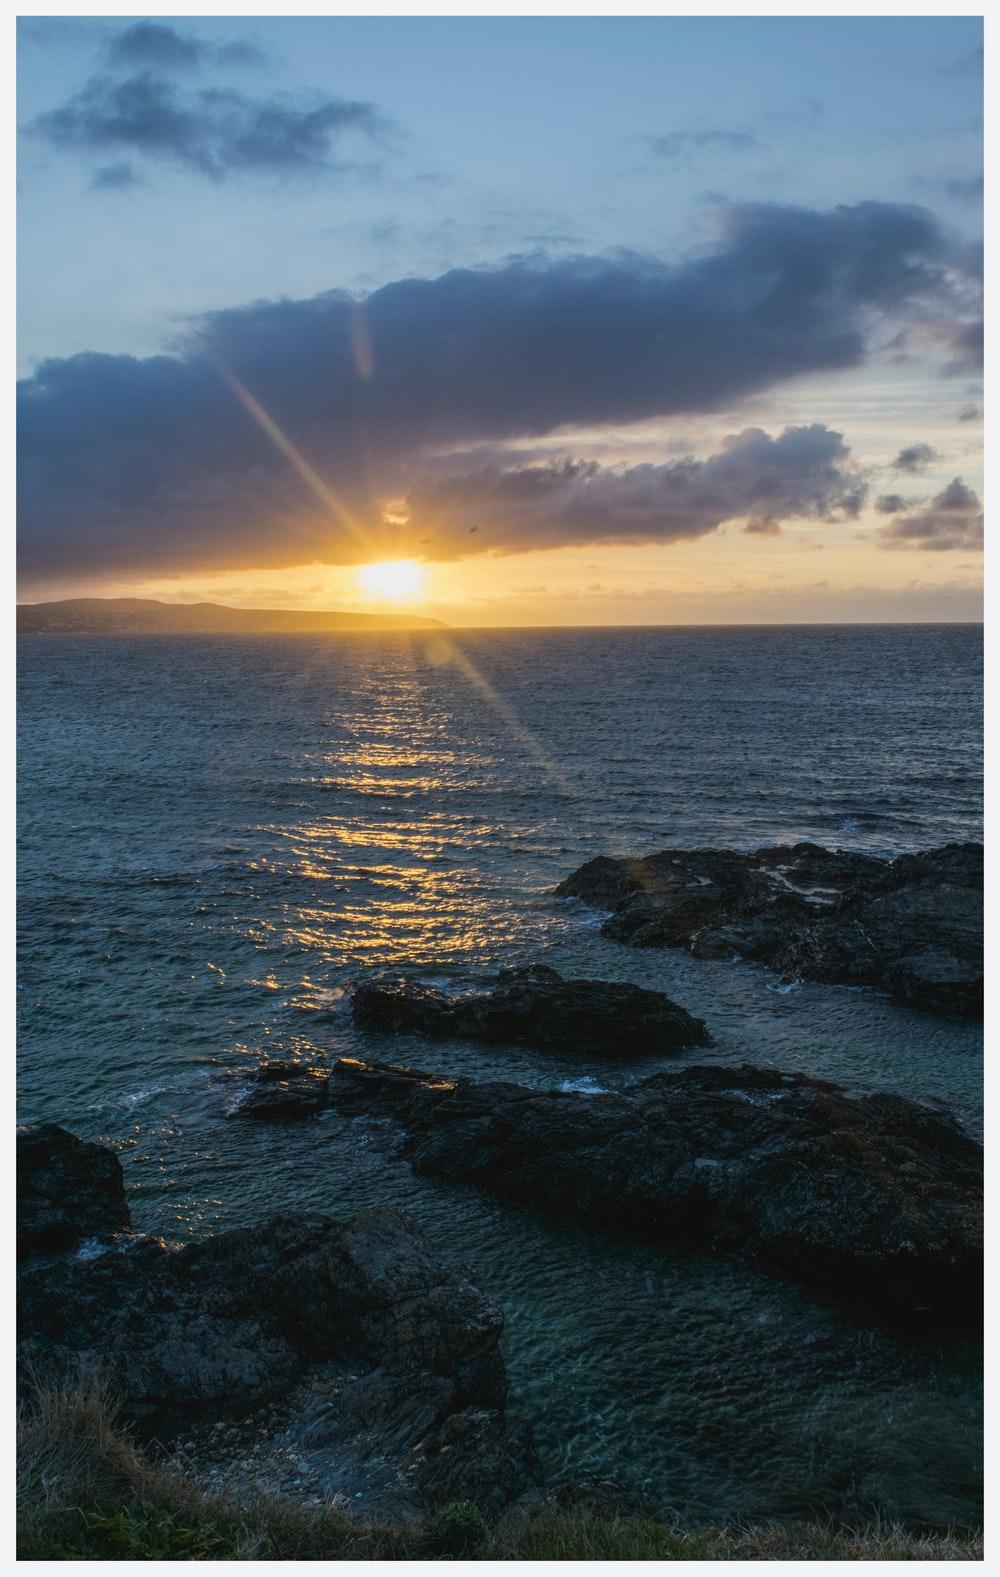 Cornwall Beach Sunset Picture. Download Free Image